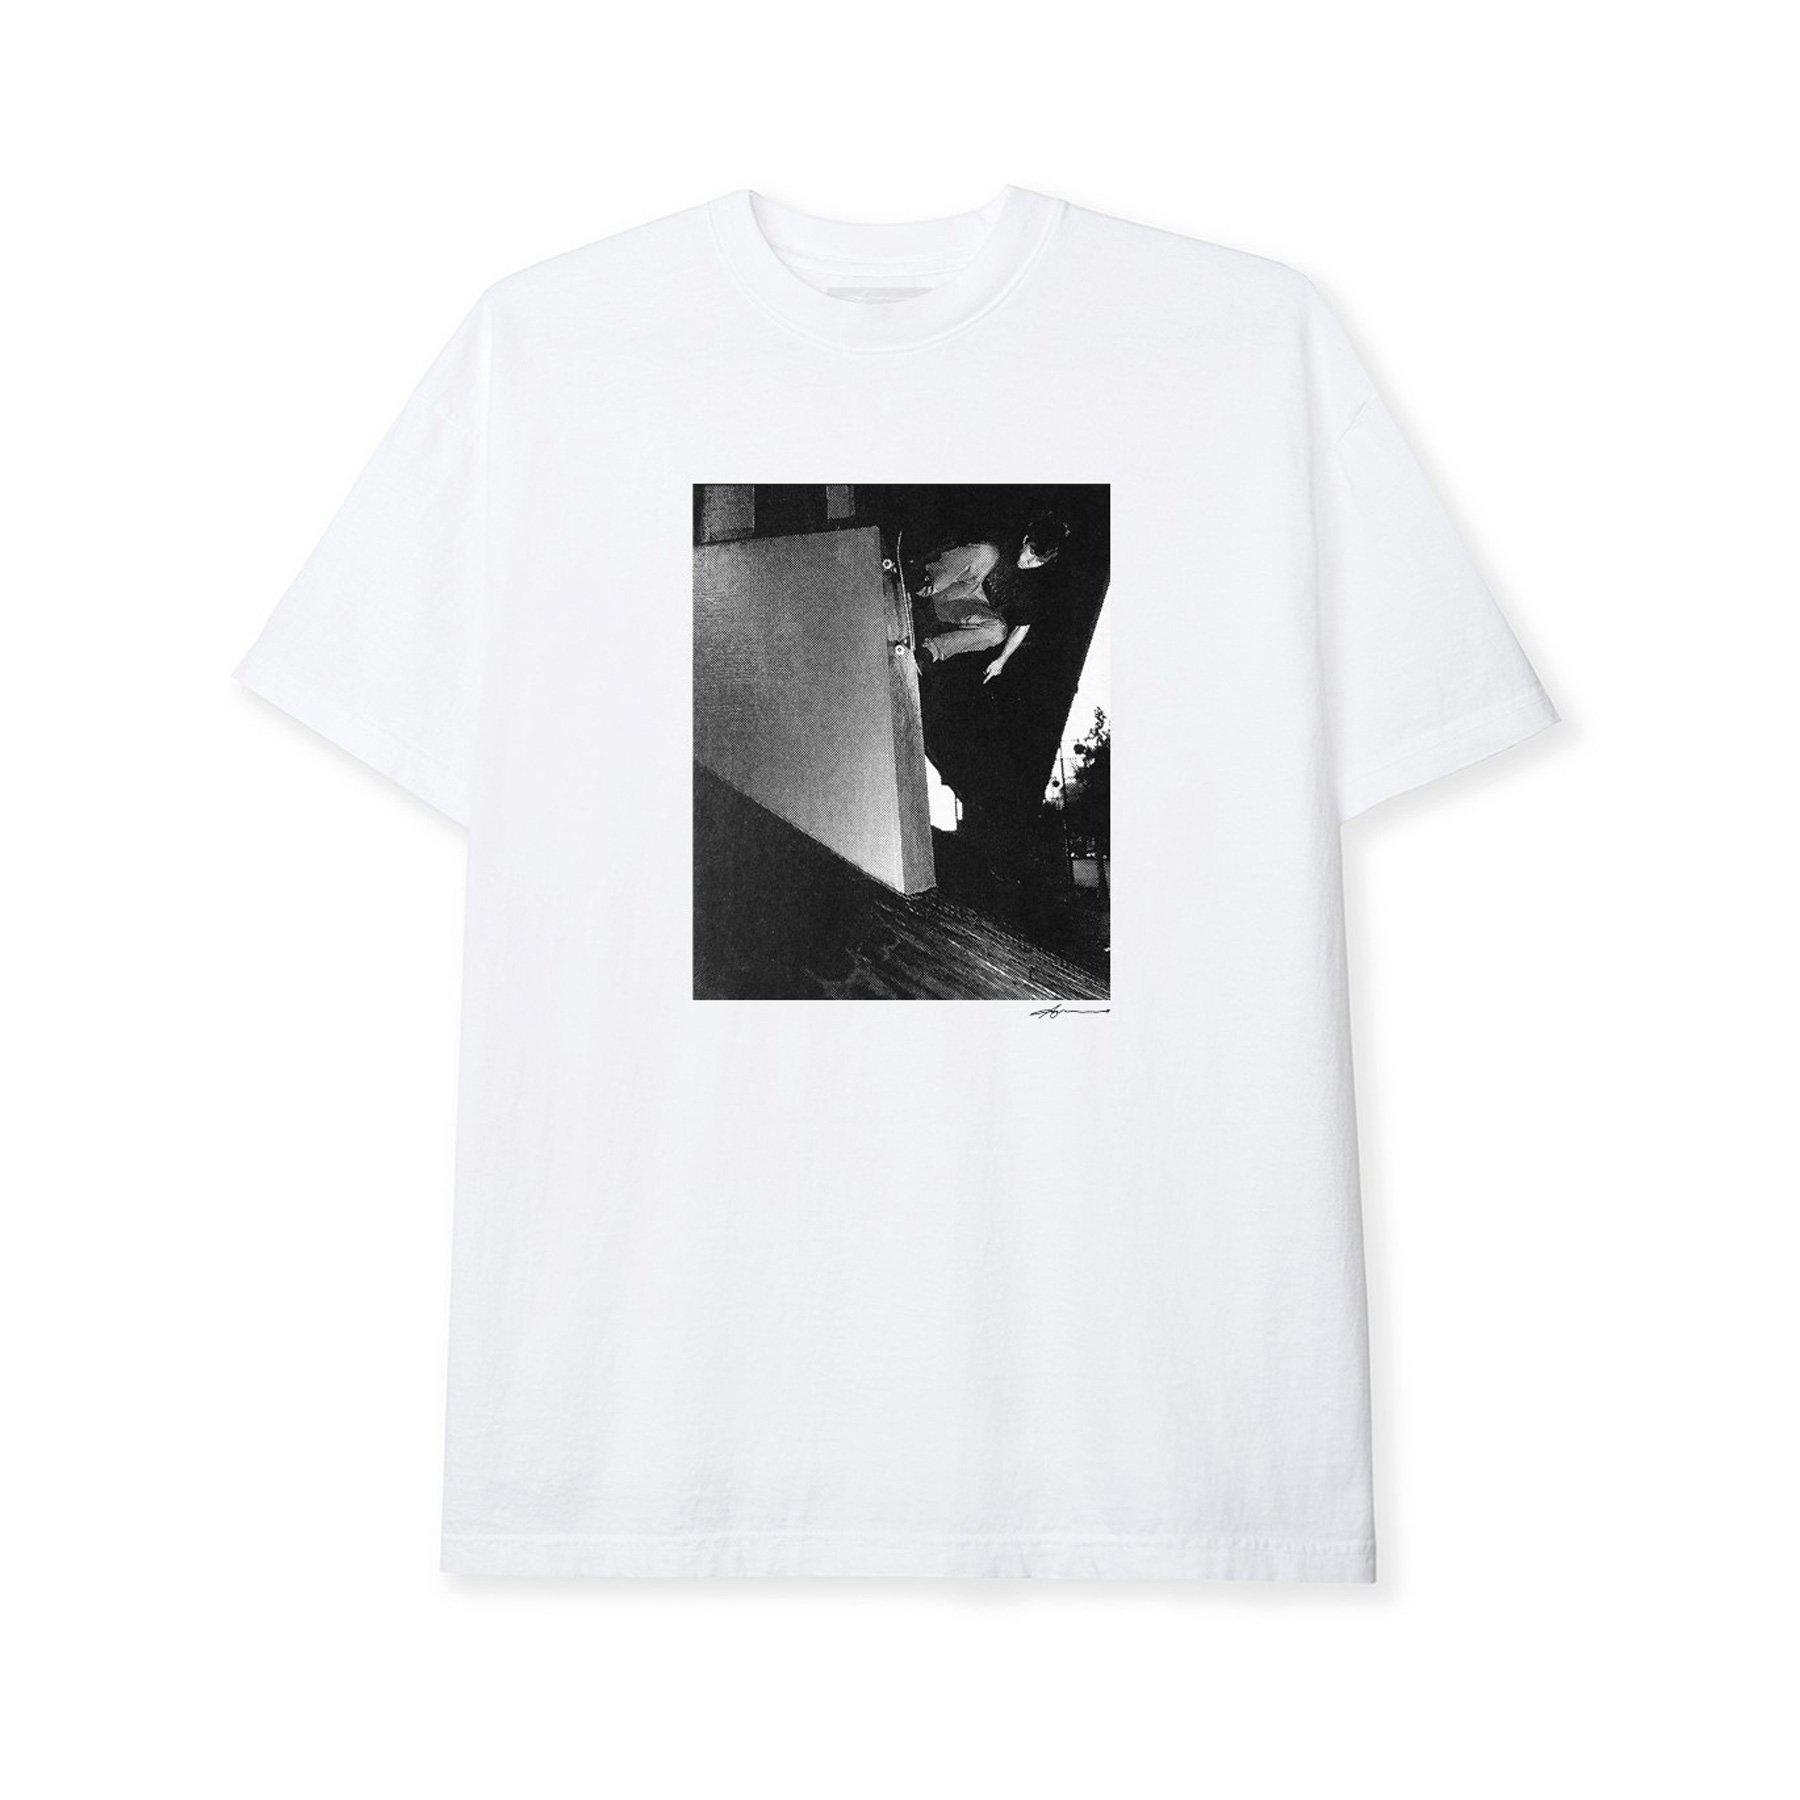 Ari Marcopoulos The Banks T-Shirt (White) by ARI MARCOPOULOS